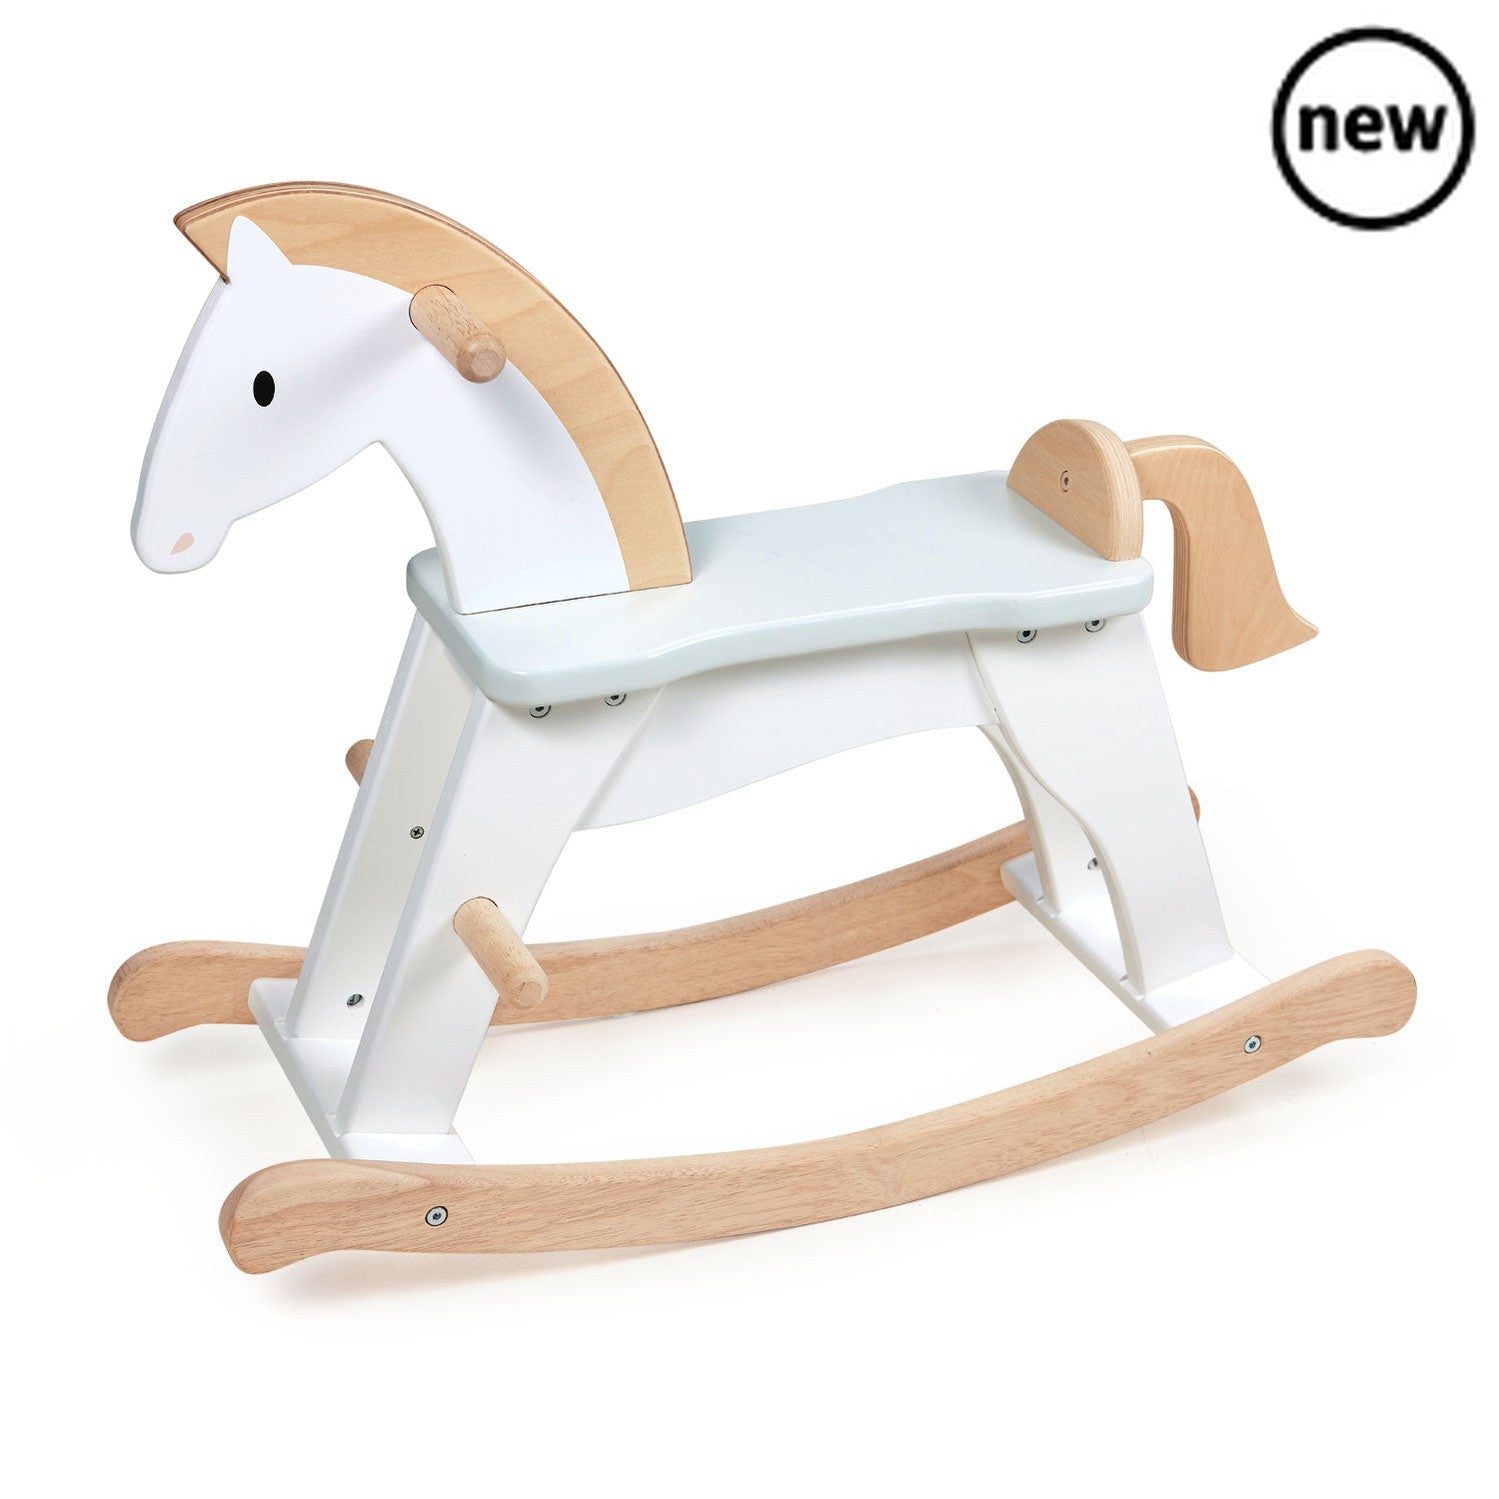 Tenderleaf Toys Wooden Lucky Rocking Horse, Gallop through the snowfields on your lucky horse. A premium rocking horse inspired by the classics. A traditional and essential toy for the nursery or playroom. Simple and chic, painted in white with details in natural wood., Tenderleaf Toys Wooden Lucky Rocking Horse,Wooden Toys,Tenderleaf, 